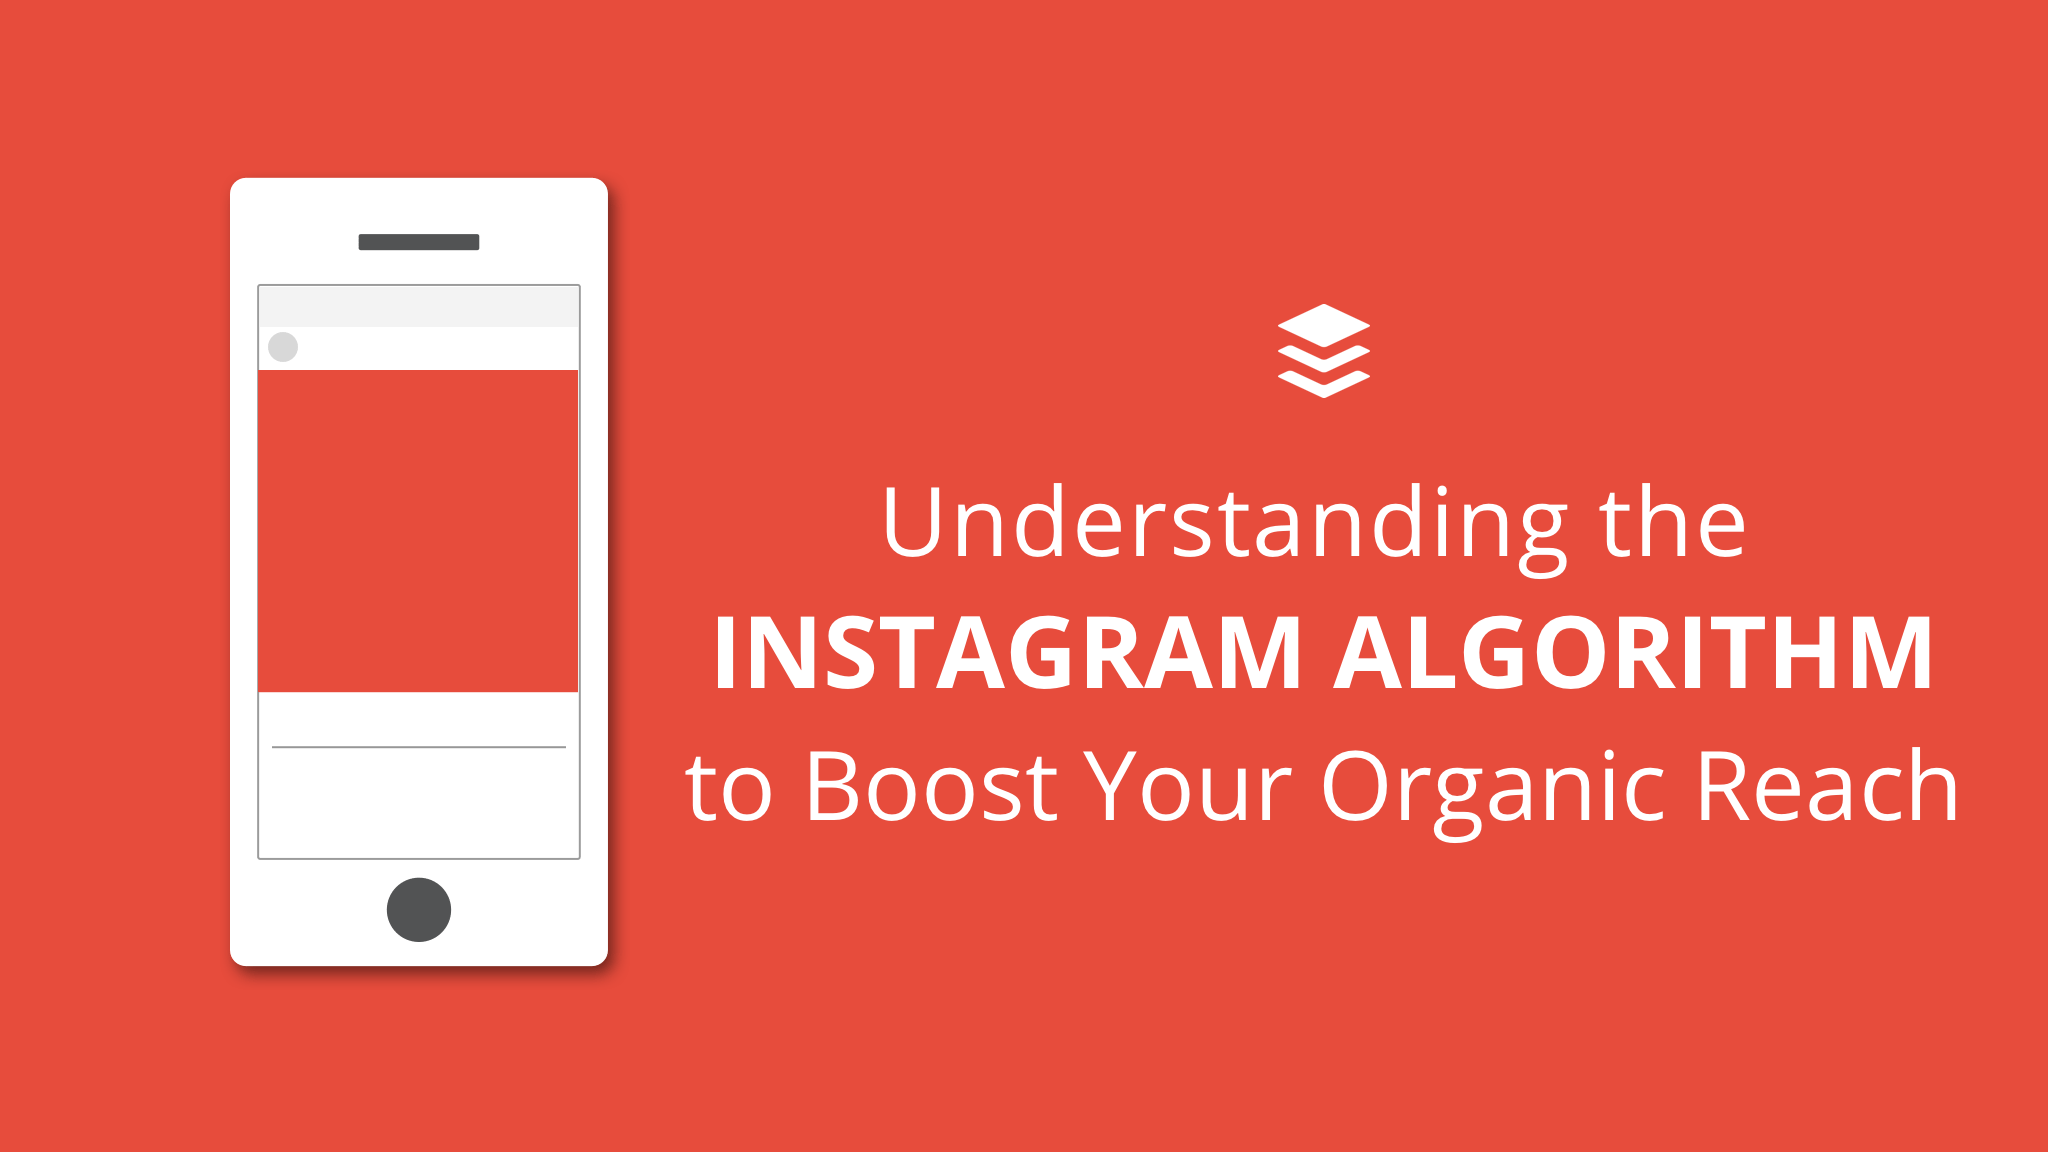 Understanding the Instagram Algorithm: 7 Key Factors and Why the Algorithm is Great for Marketers